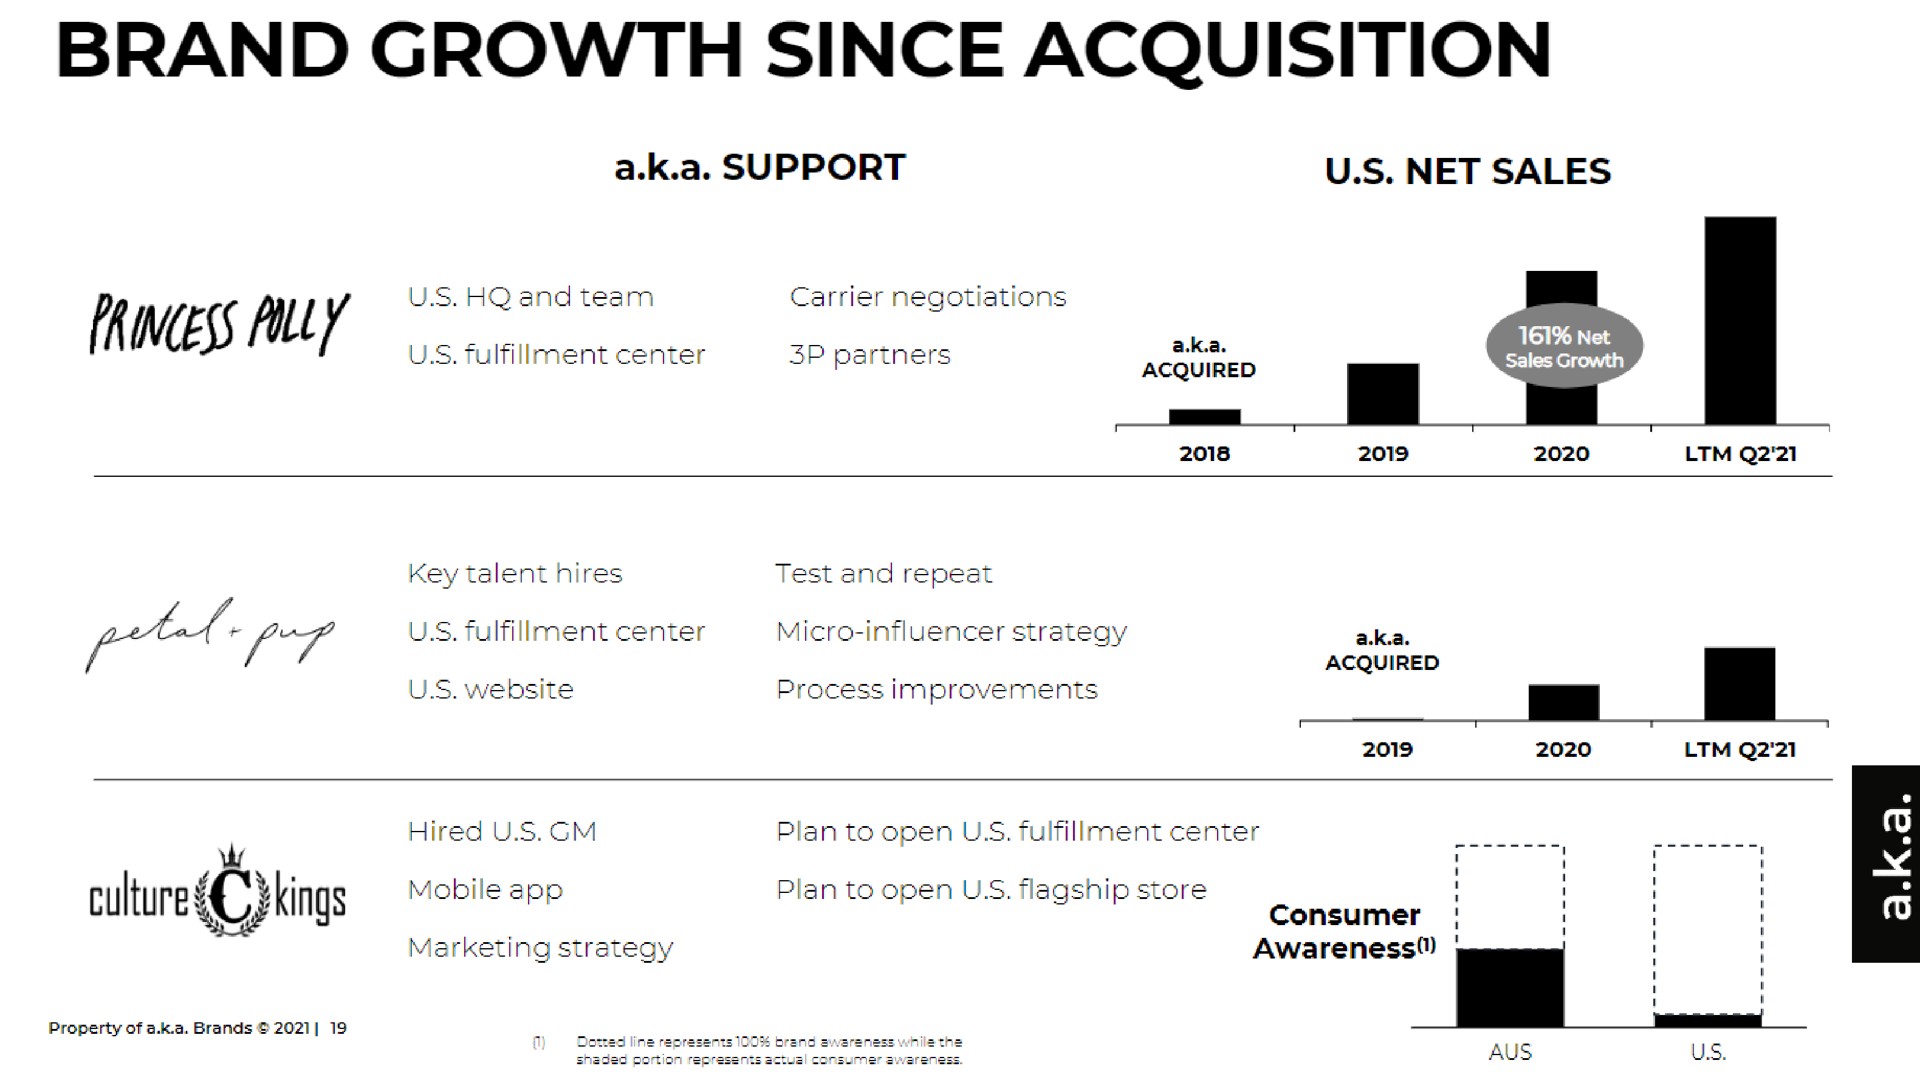 brand growth since acquisition cultures kings consumer | a.k.a. Brands